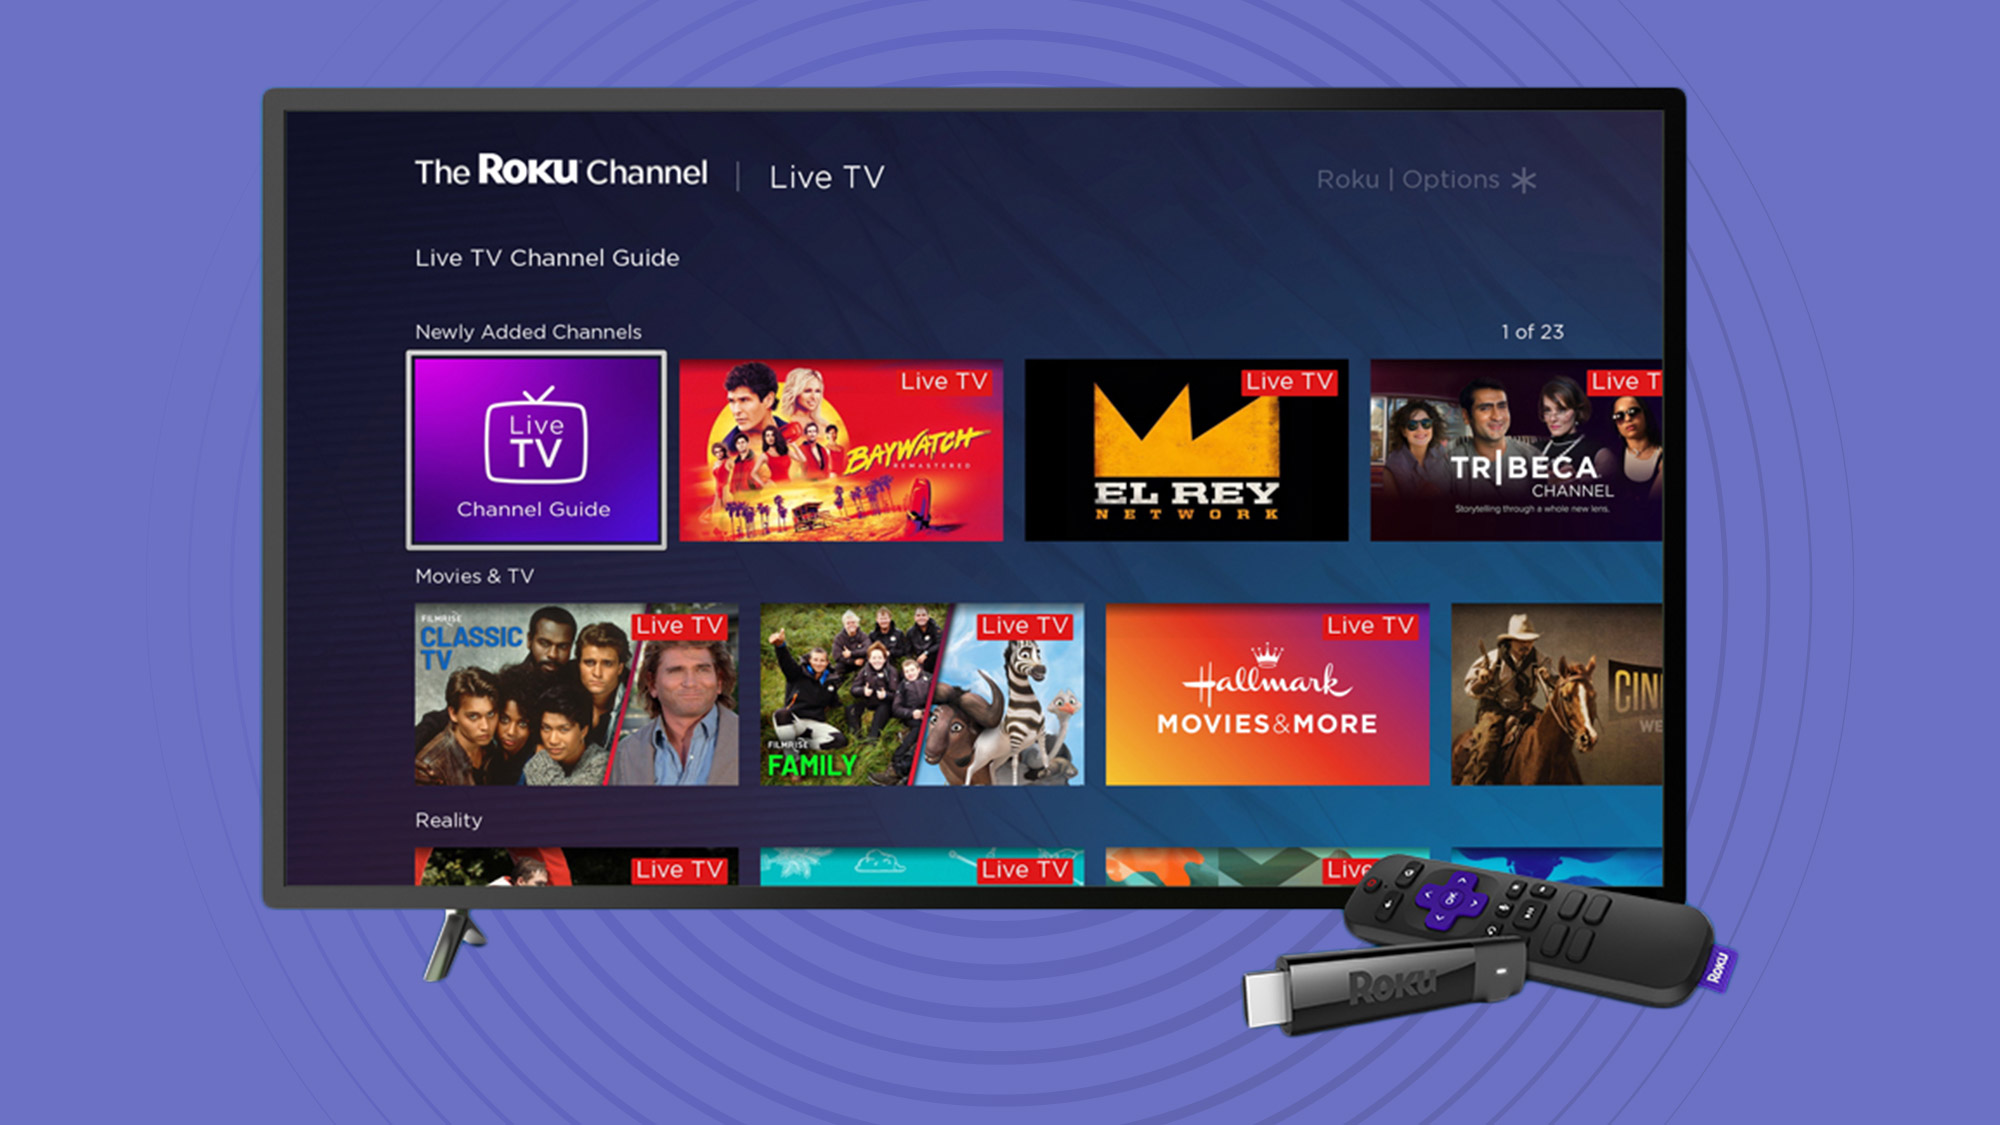 The Roku Channel is now available on Google TV and other Android